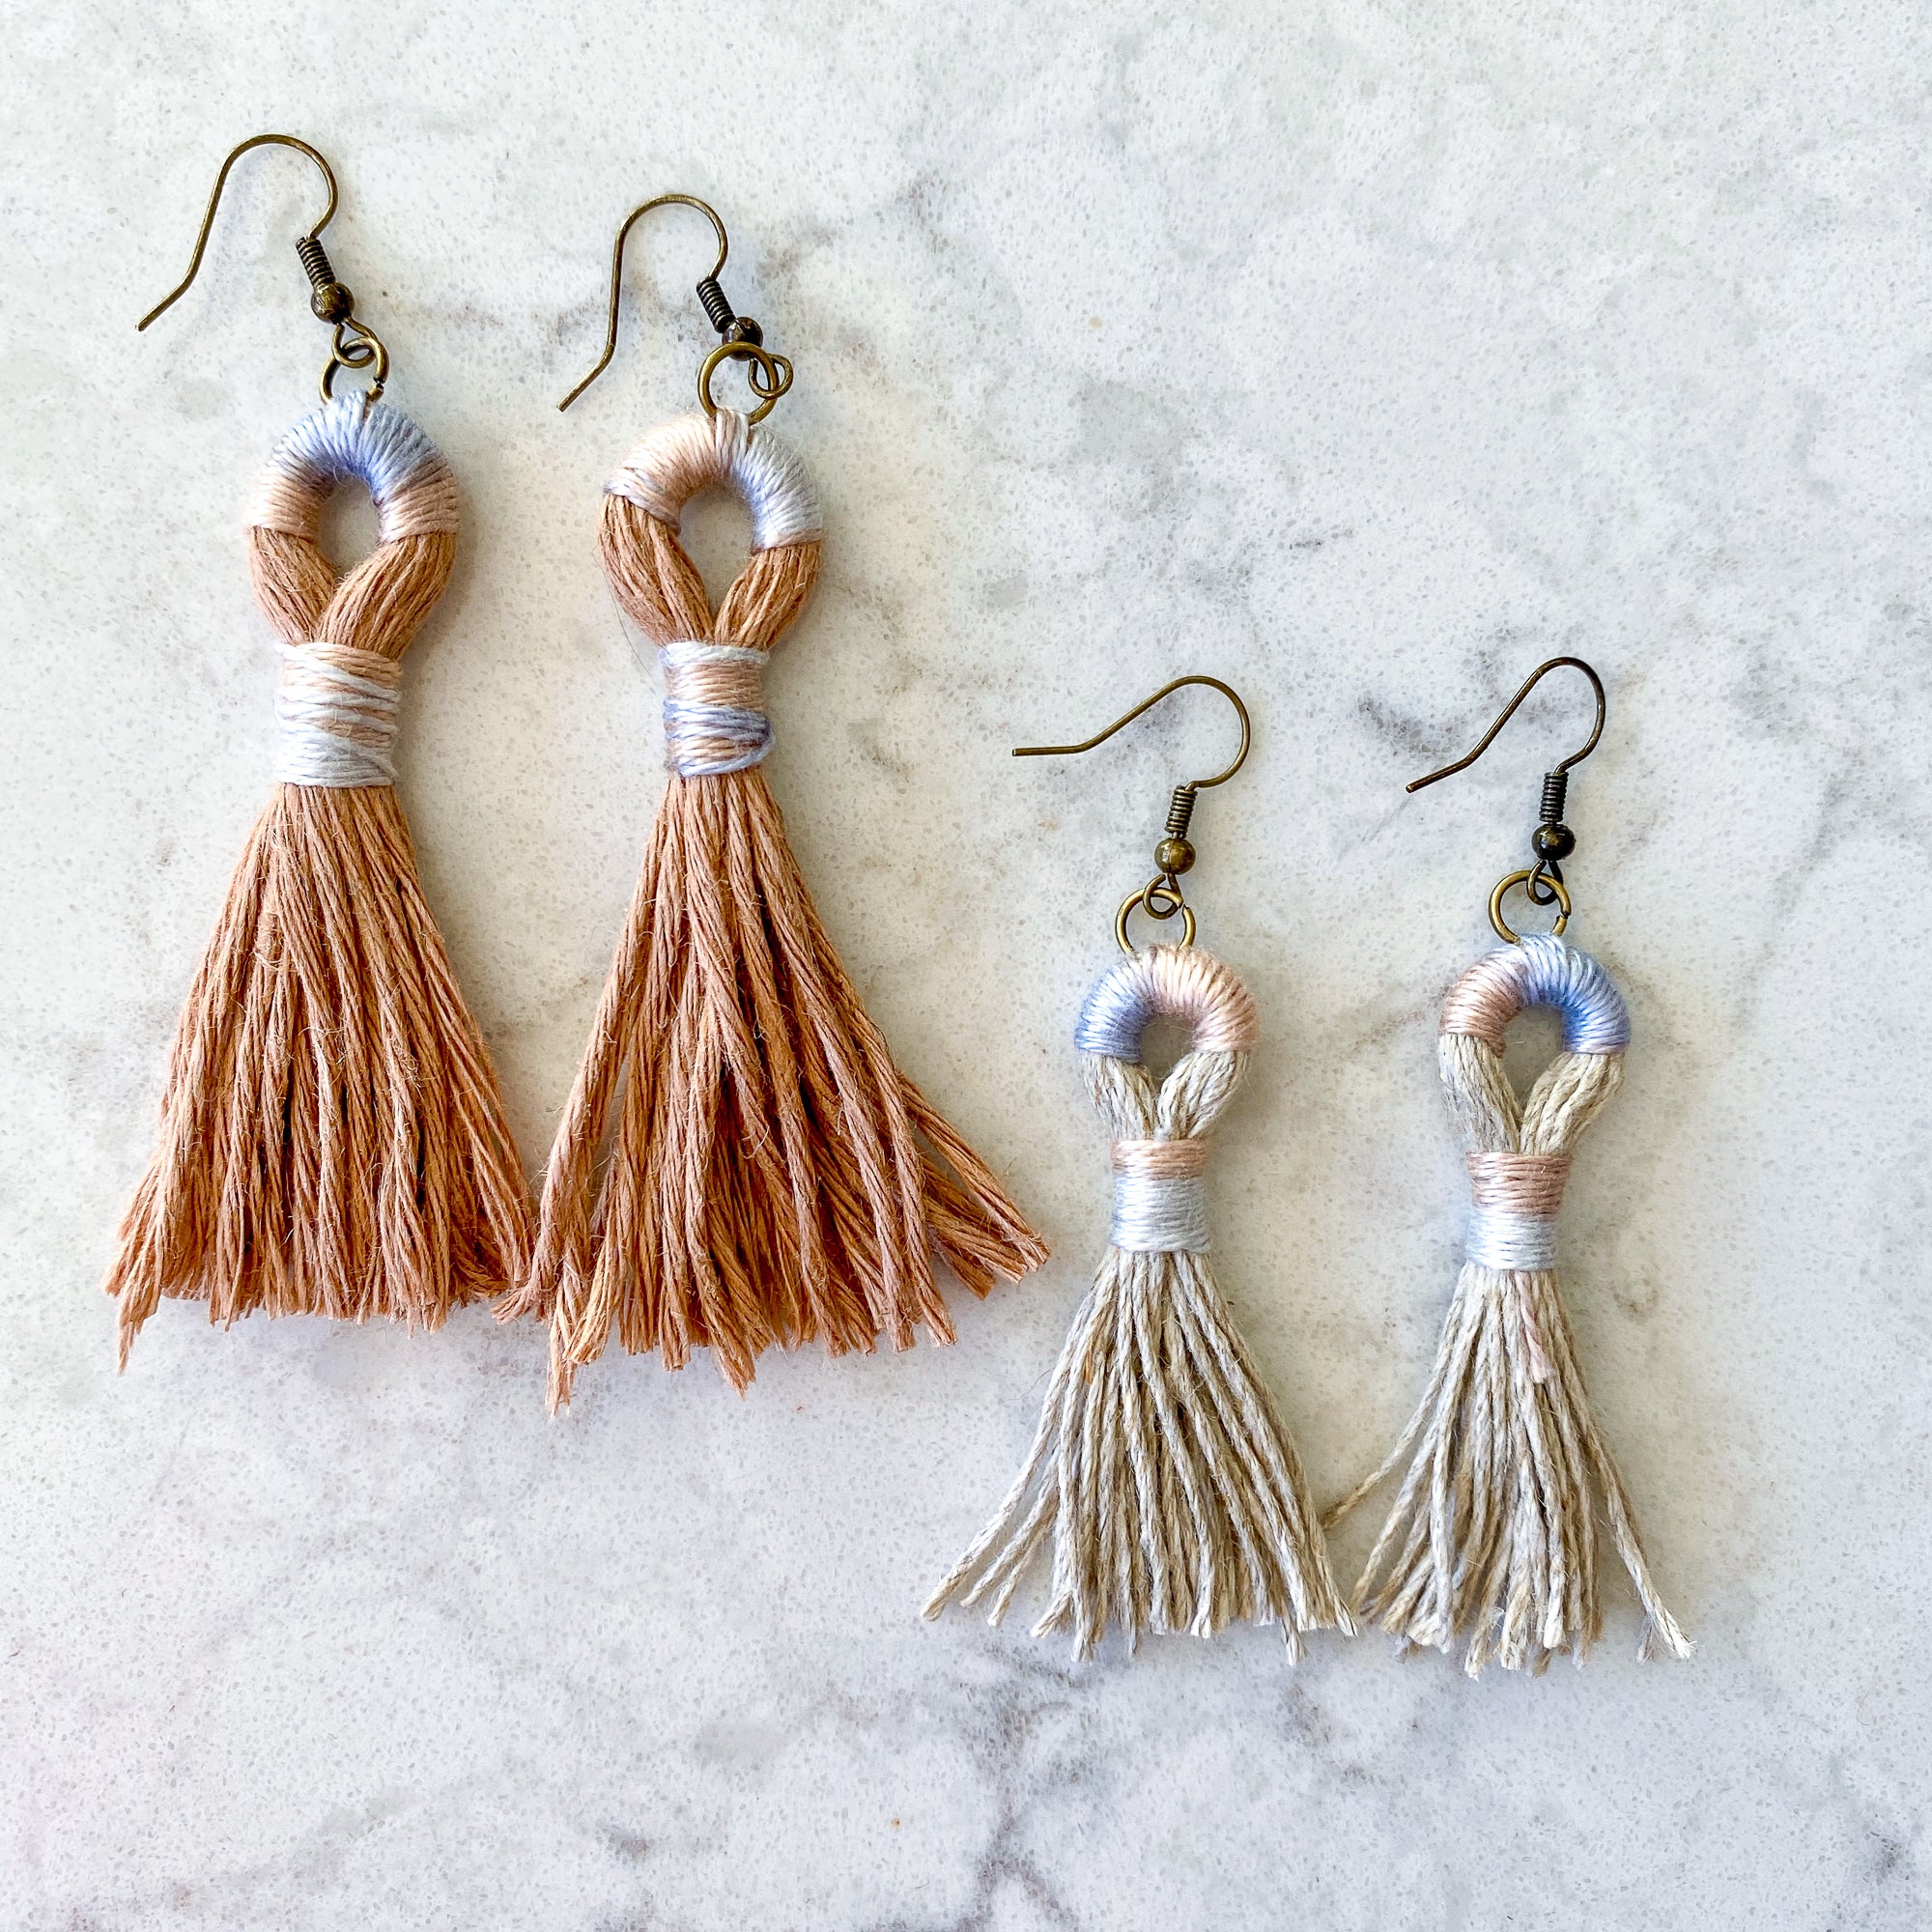 How To Make Tiny Tassel Earrings - Running With Sisters